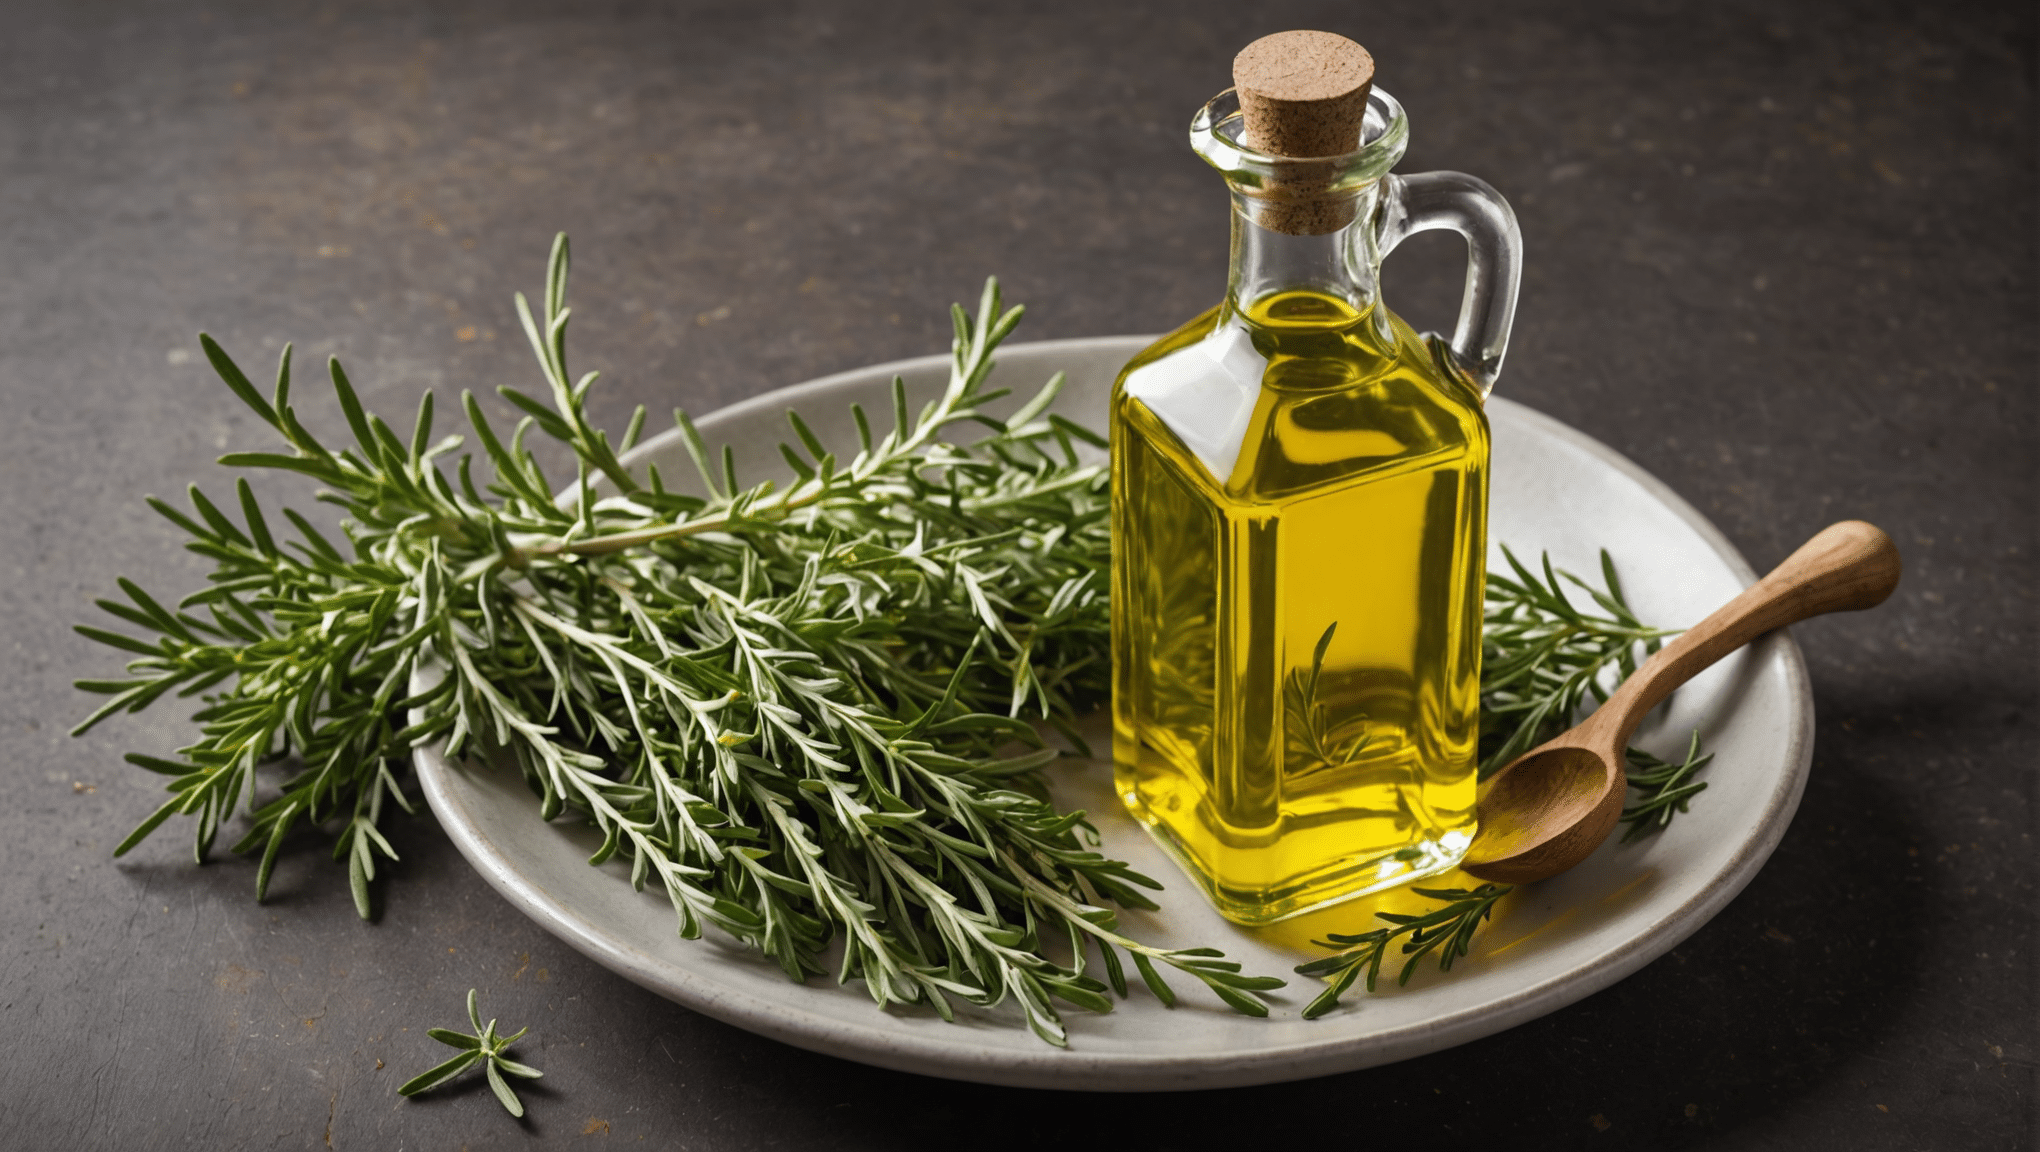 Wormwood Infused Olive Oil: A versatile cooking and salad dressing oil infused with the earthy flavor of Wormwood.